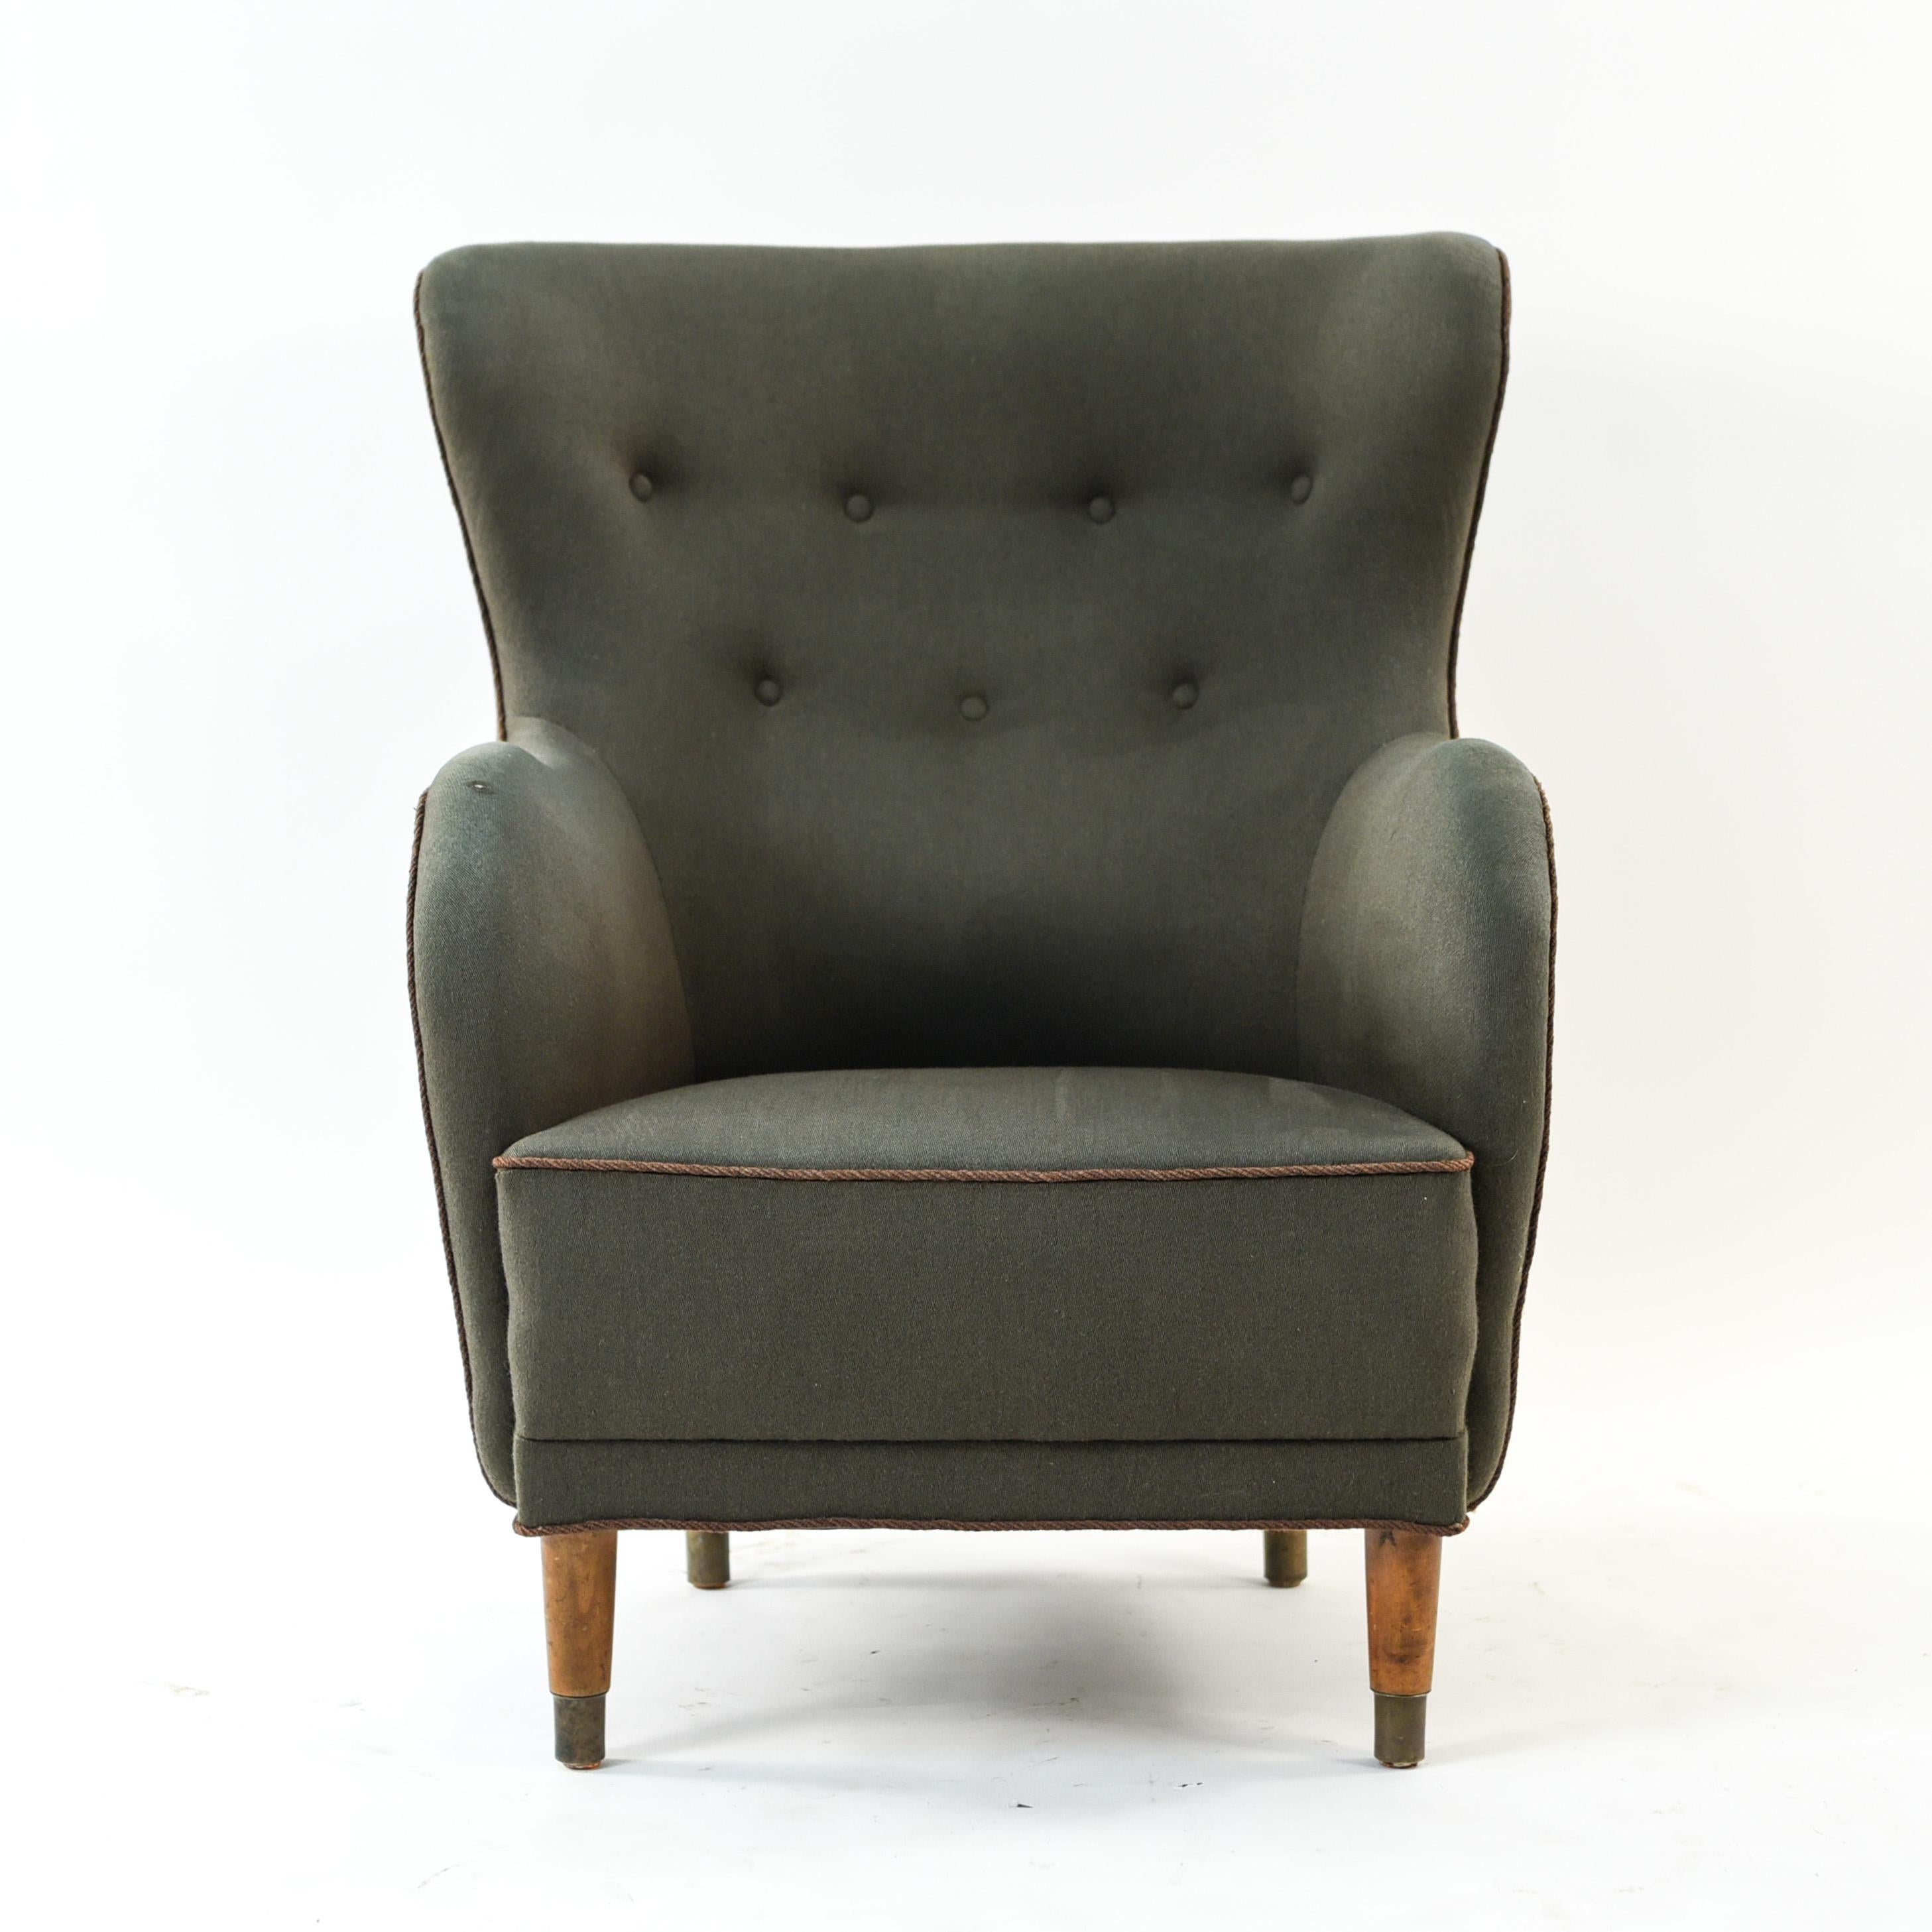 This Danish midcentury wingback chair is in the style of Mogens Lassen. A very comfortable chair in a highly desirable form.